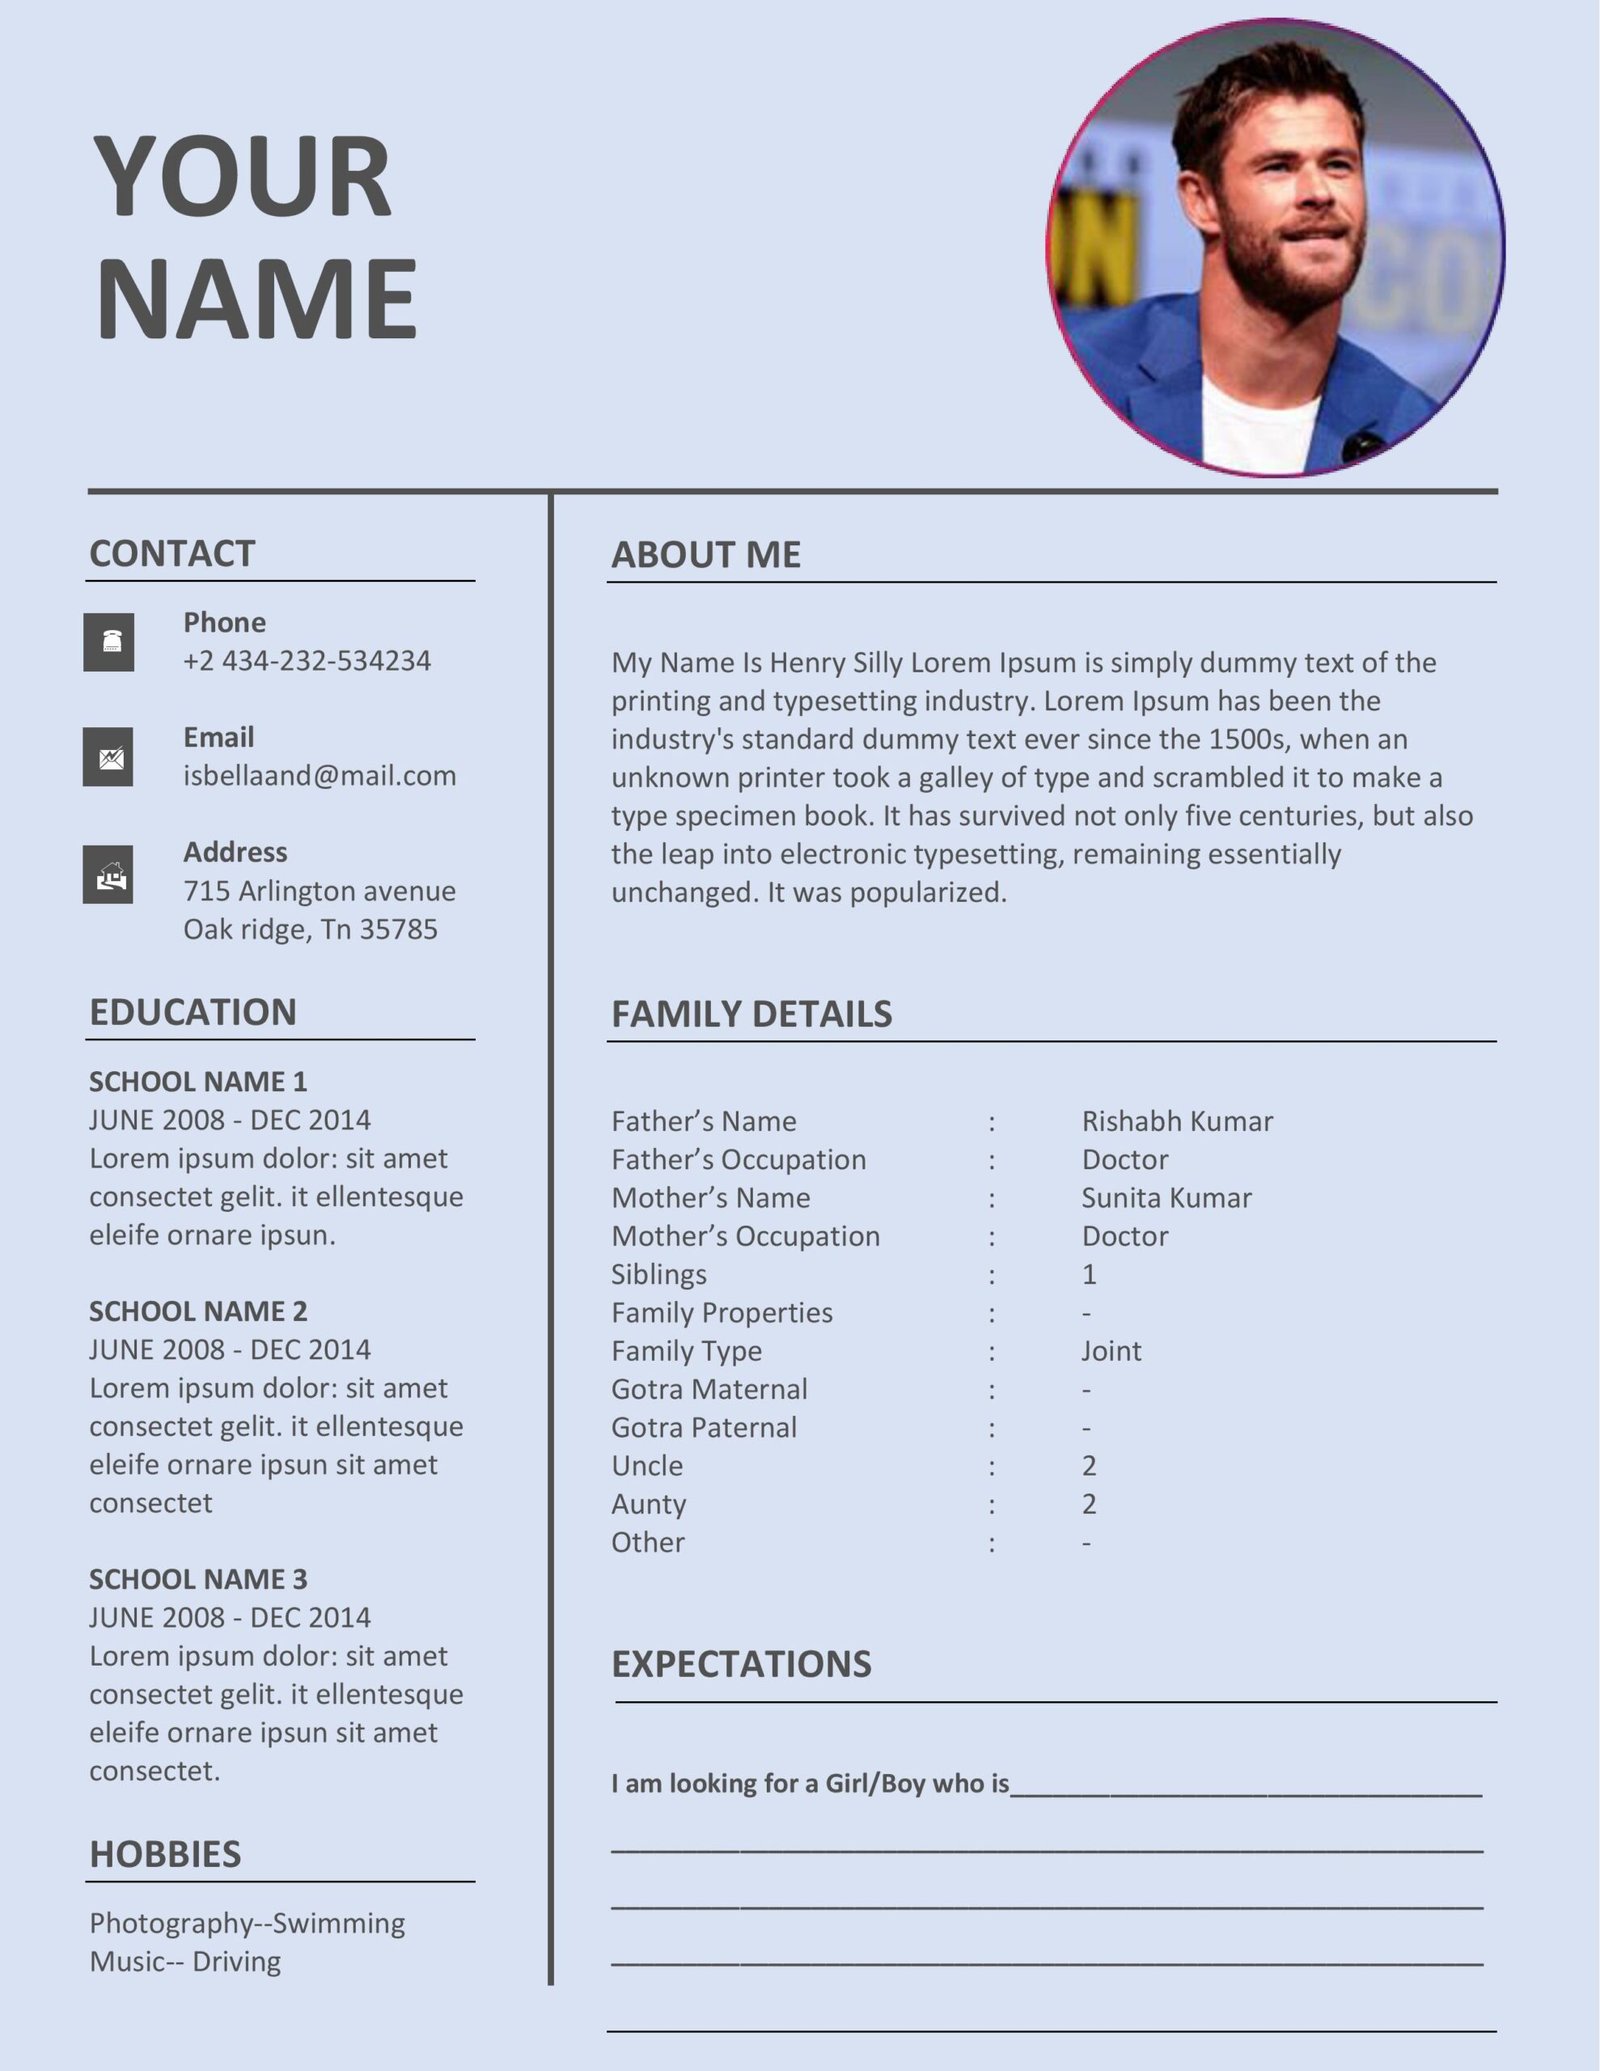 Create Biodata For Marriage Online in Ms-word